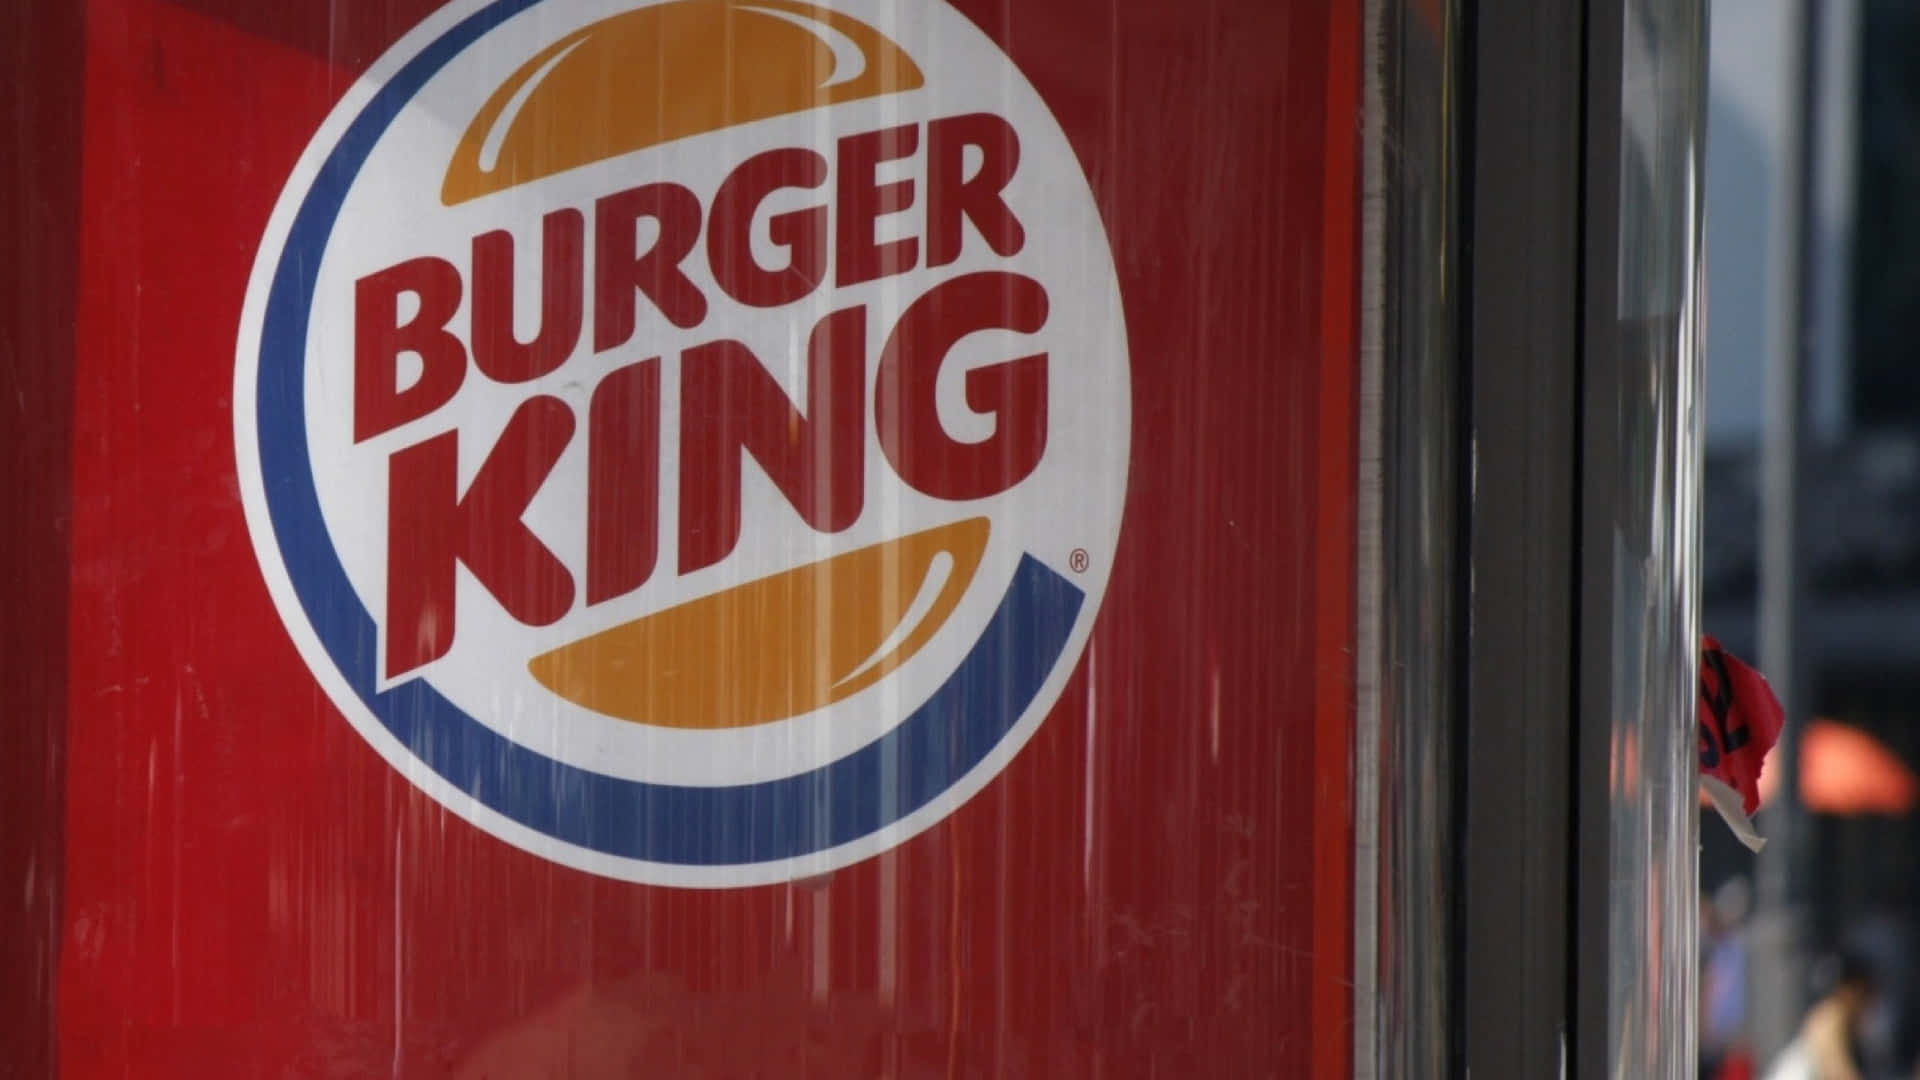 Satisfy your cravings with the juicy and delicious Burger King burgers!